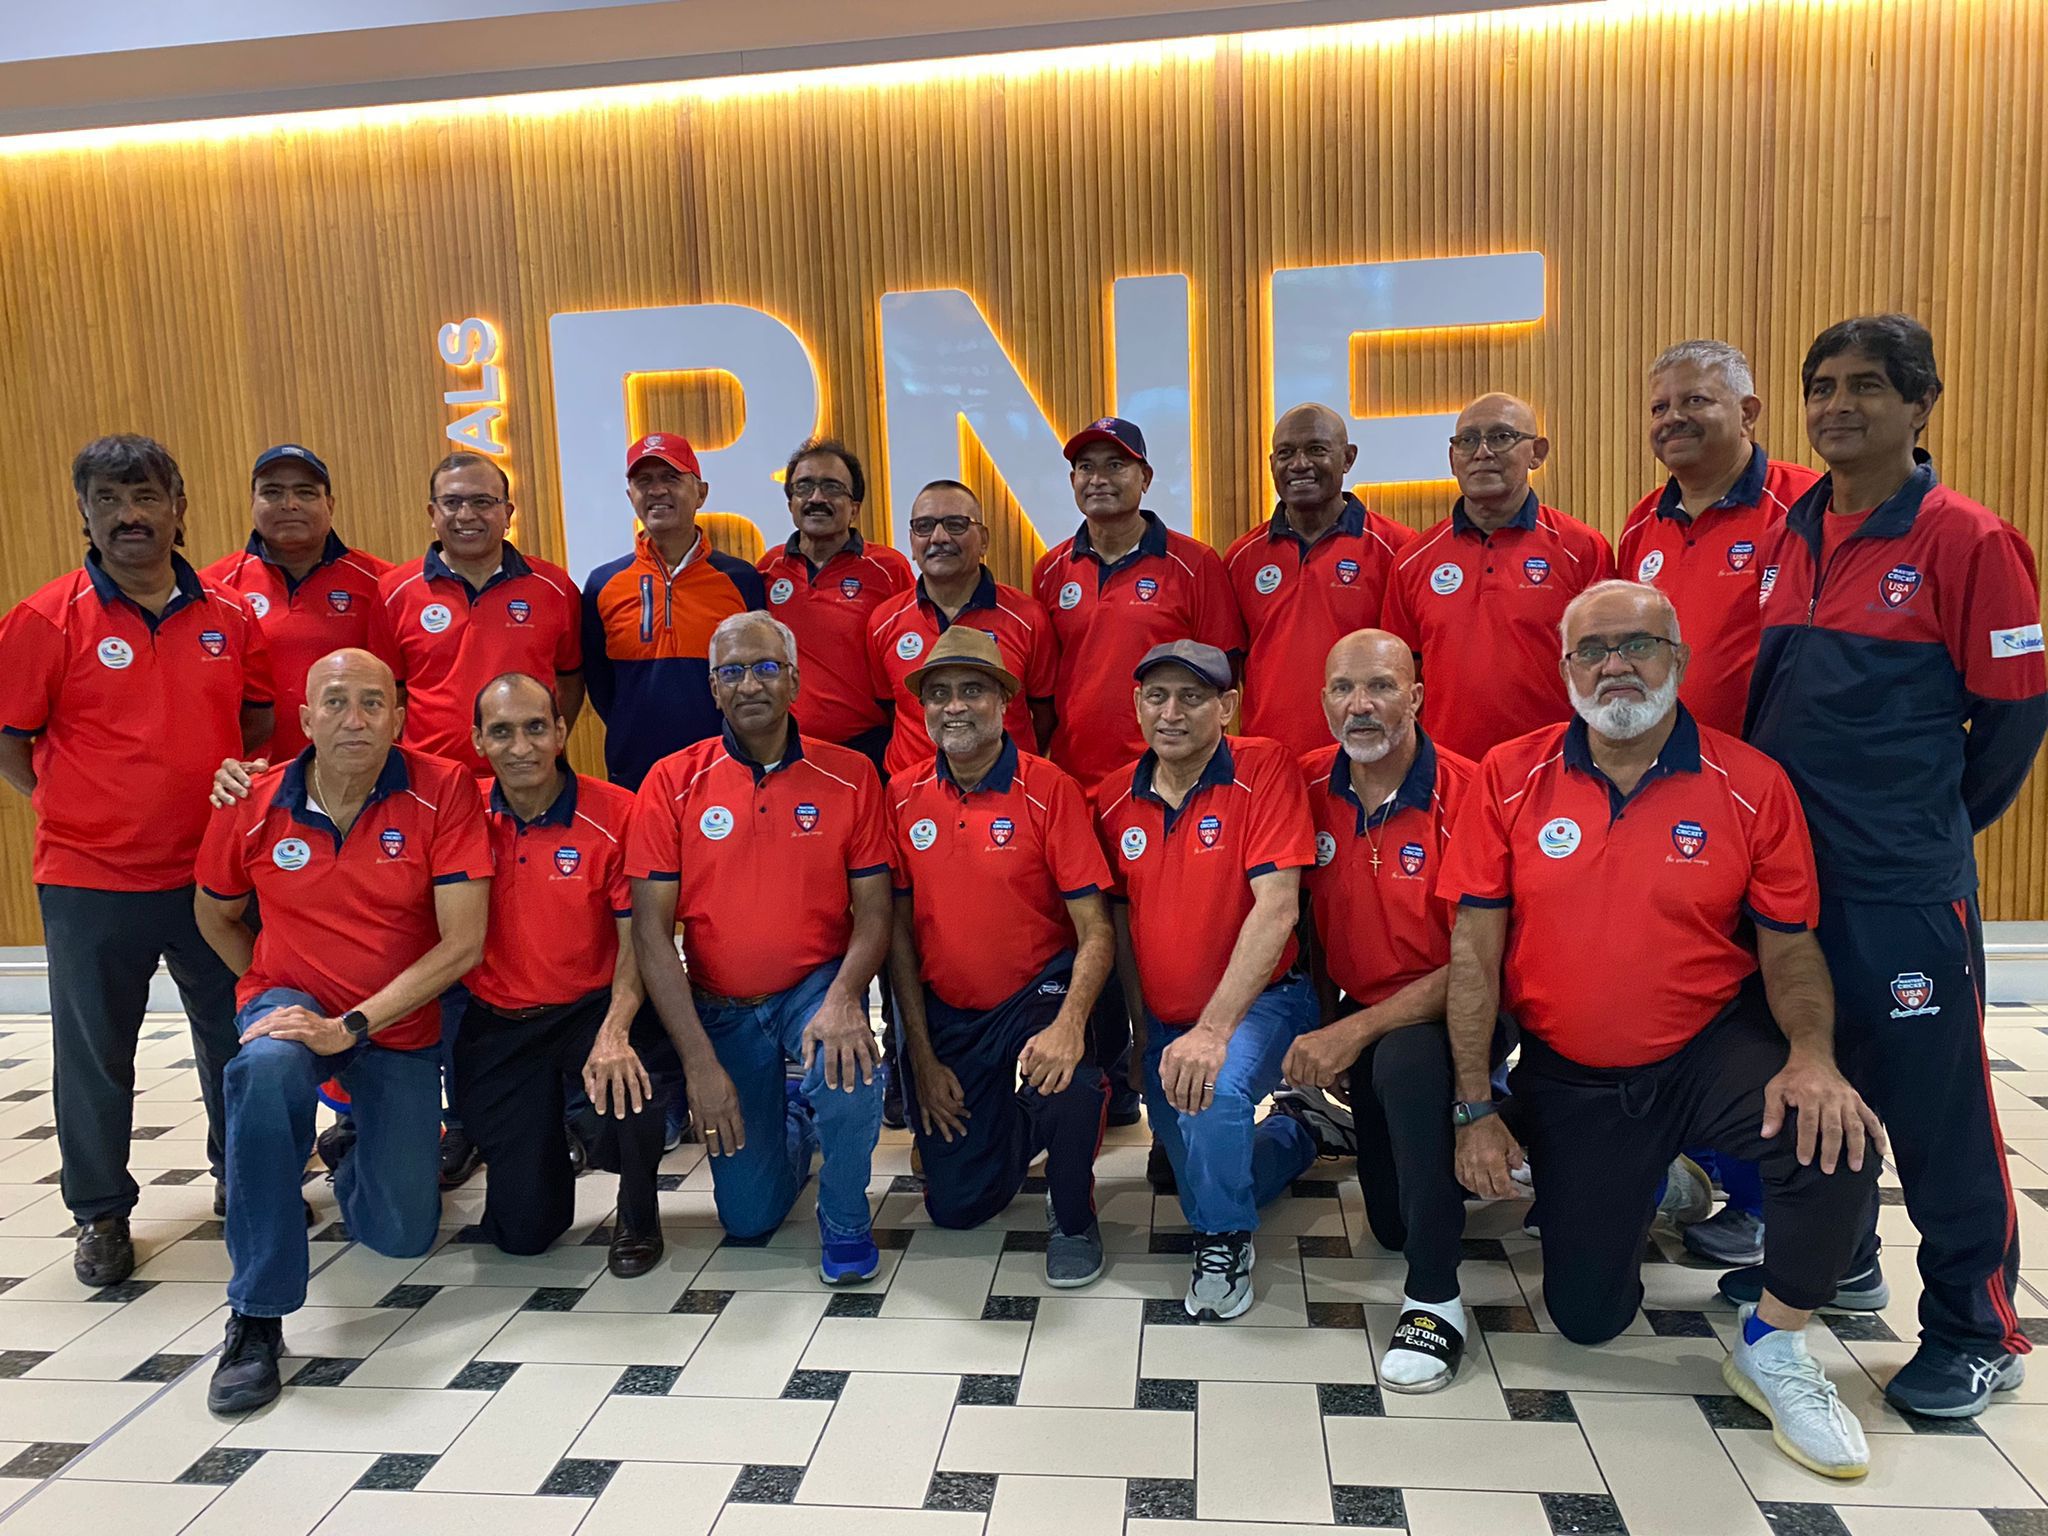 USA Cricket wishes USA Over 60s Team well at Inaugural World Cup in Australia